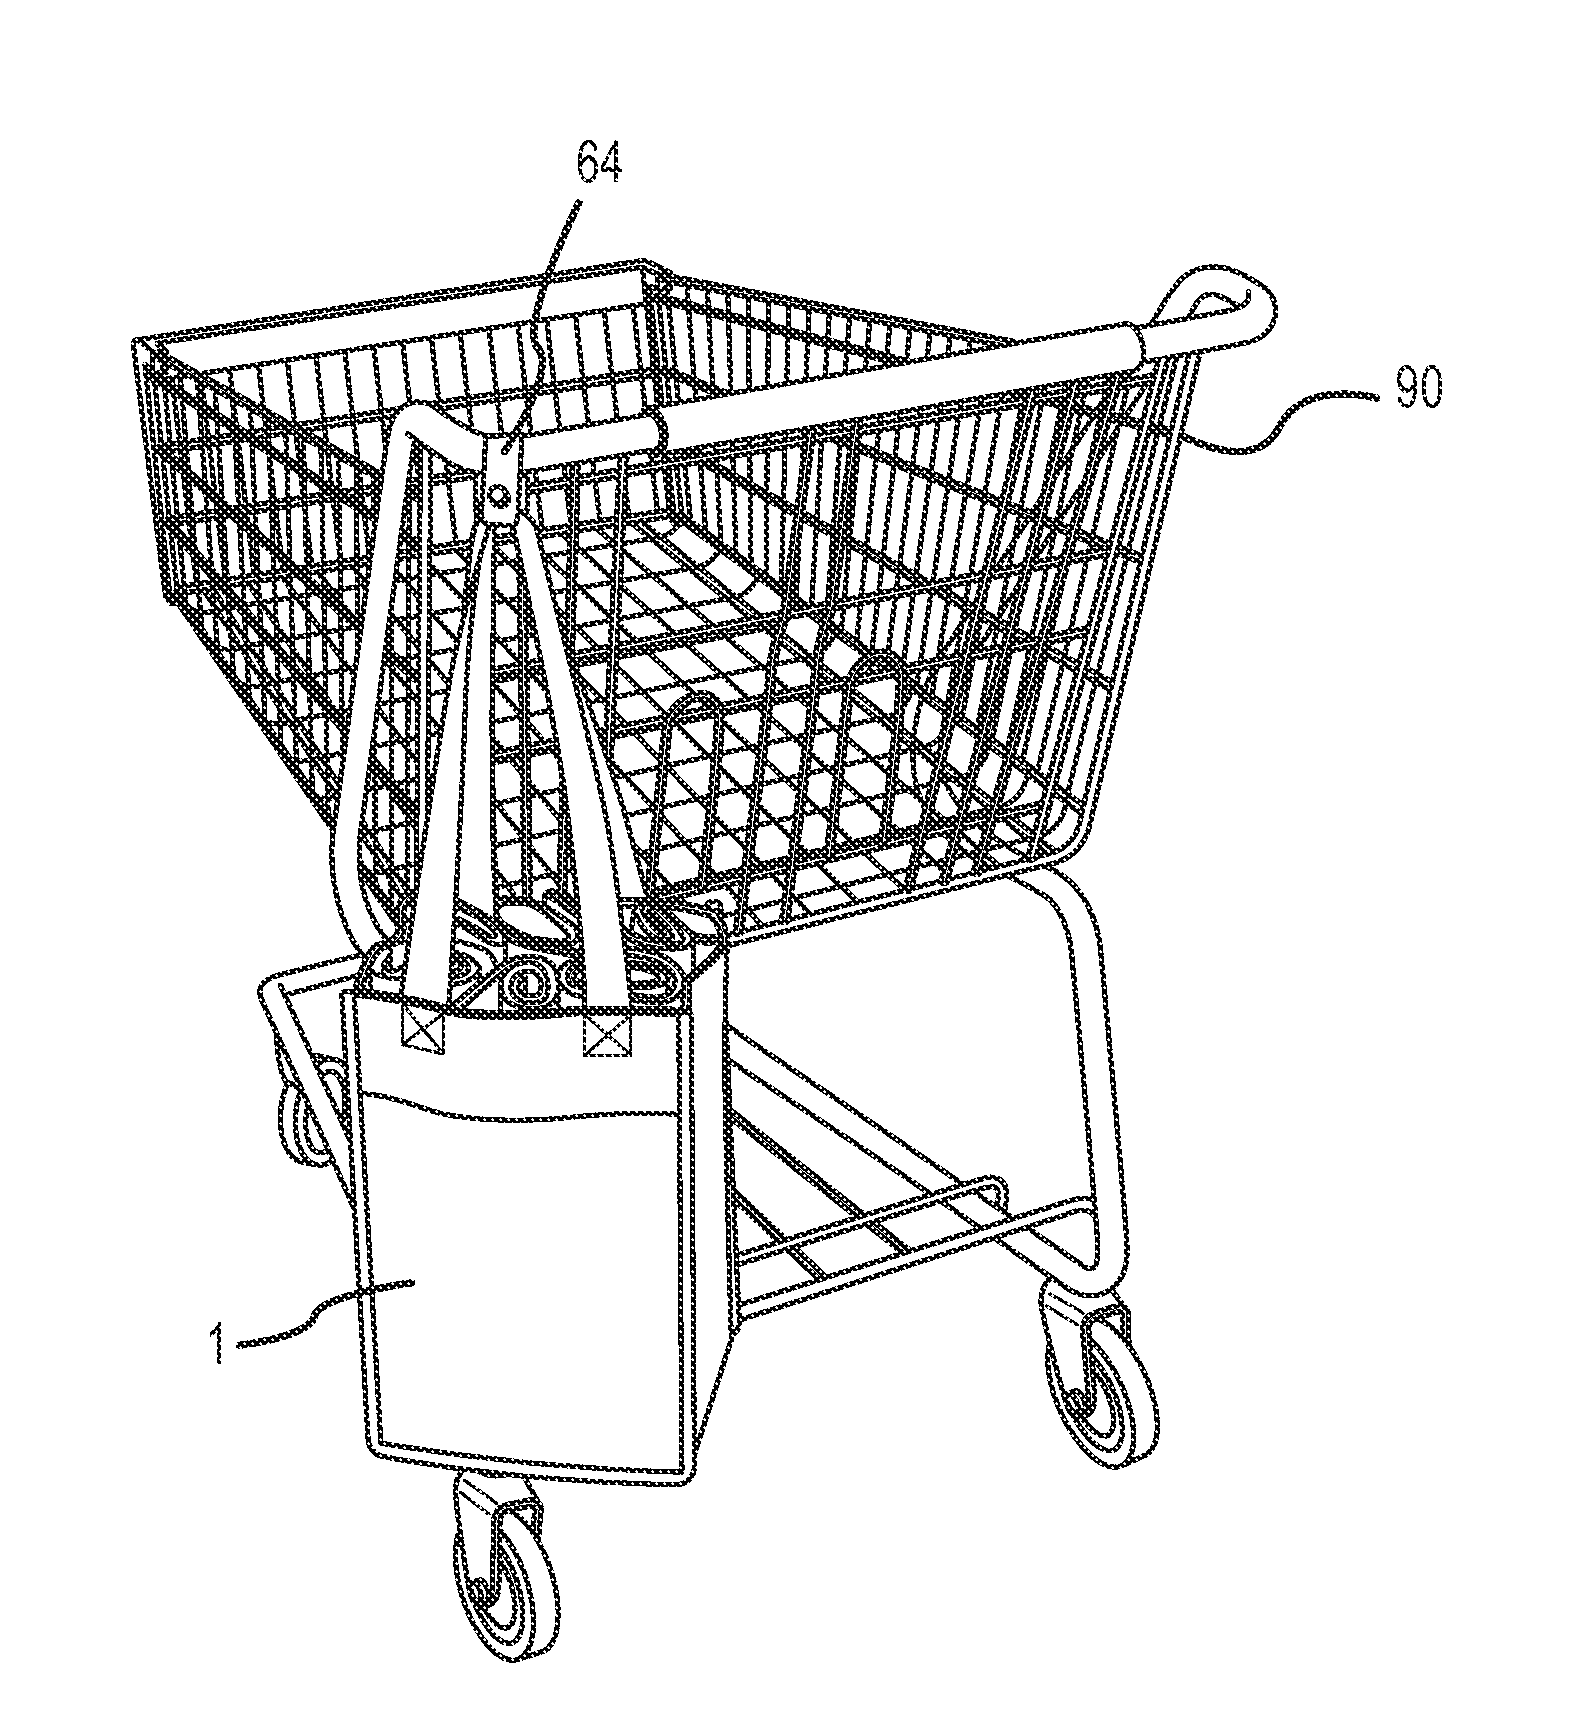 Reusable Bag Holder and System and Method of Using the Same